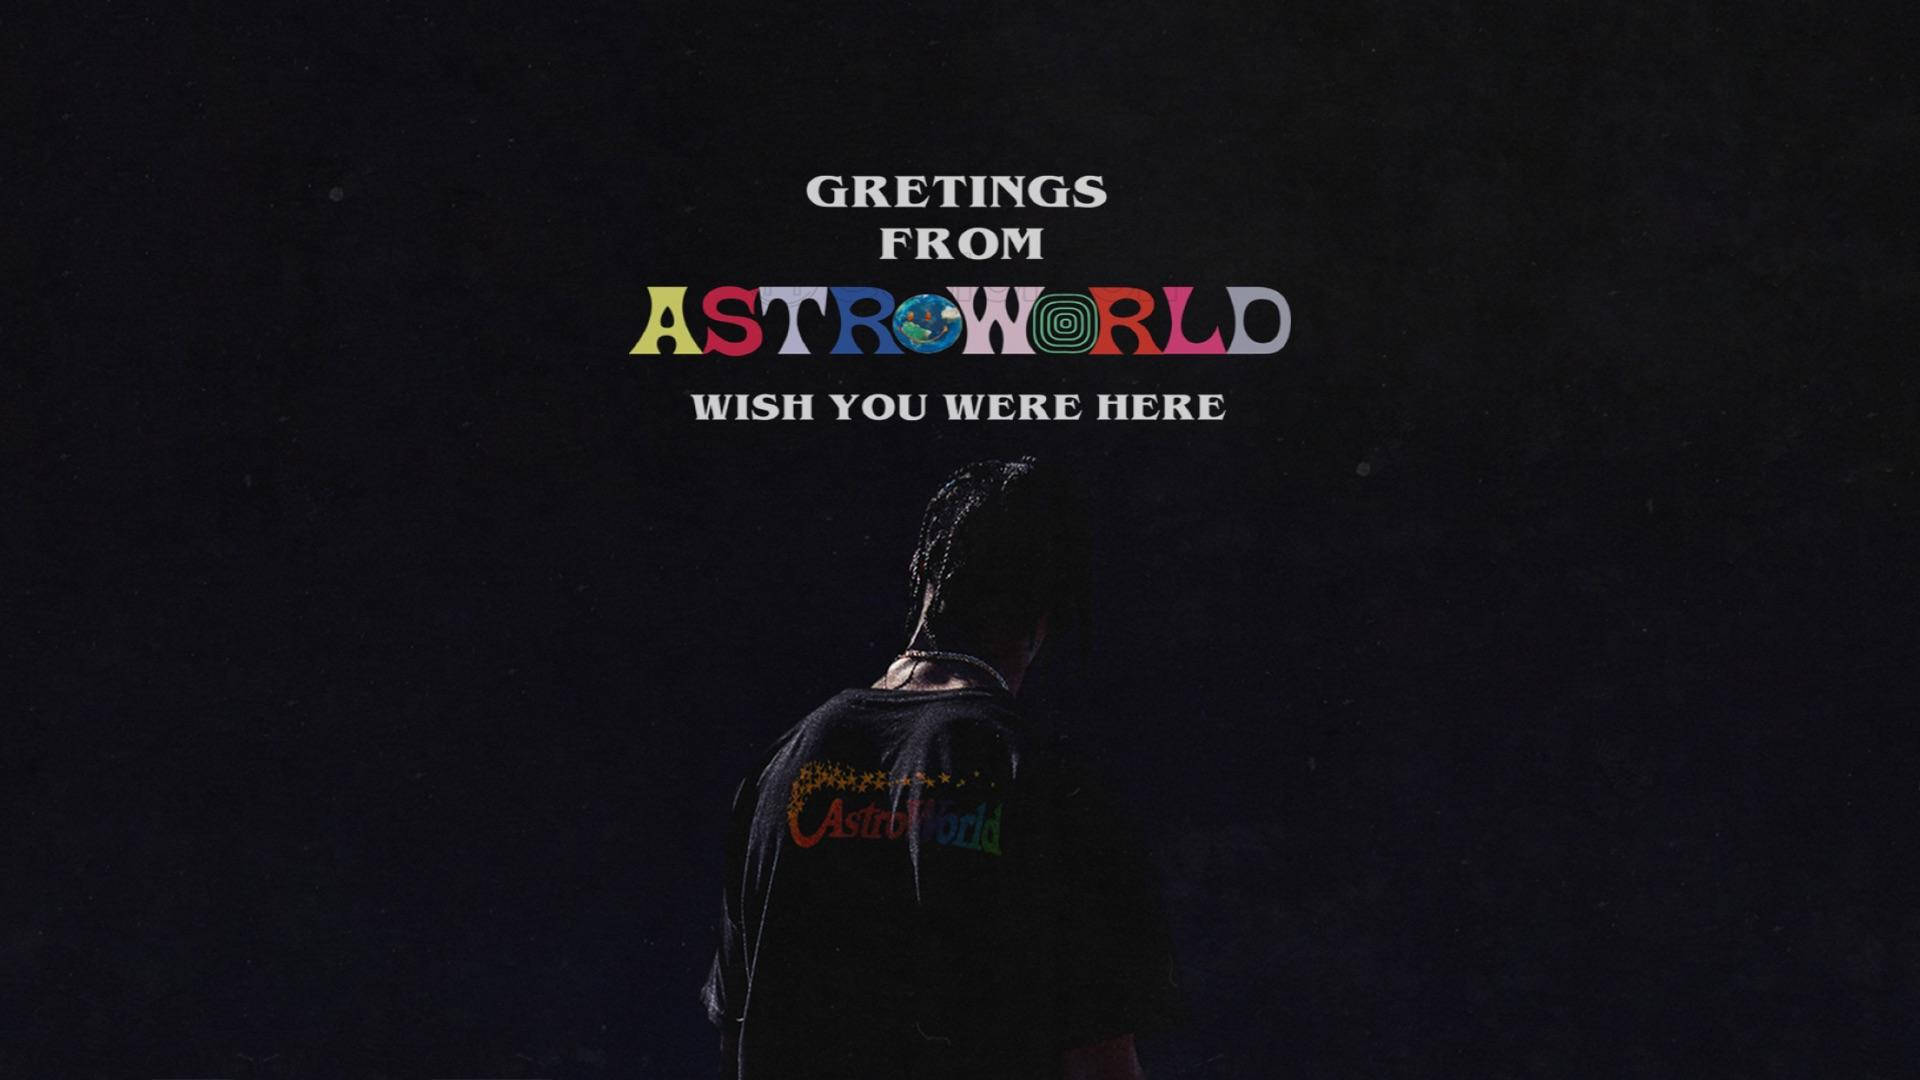 Enjoy the Astroworld experience! Wallpaper